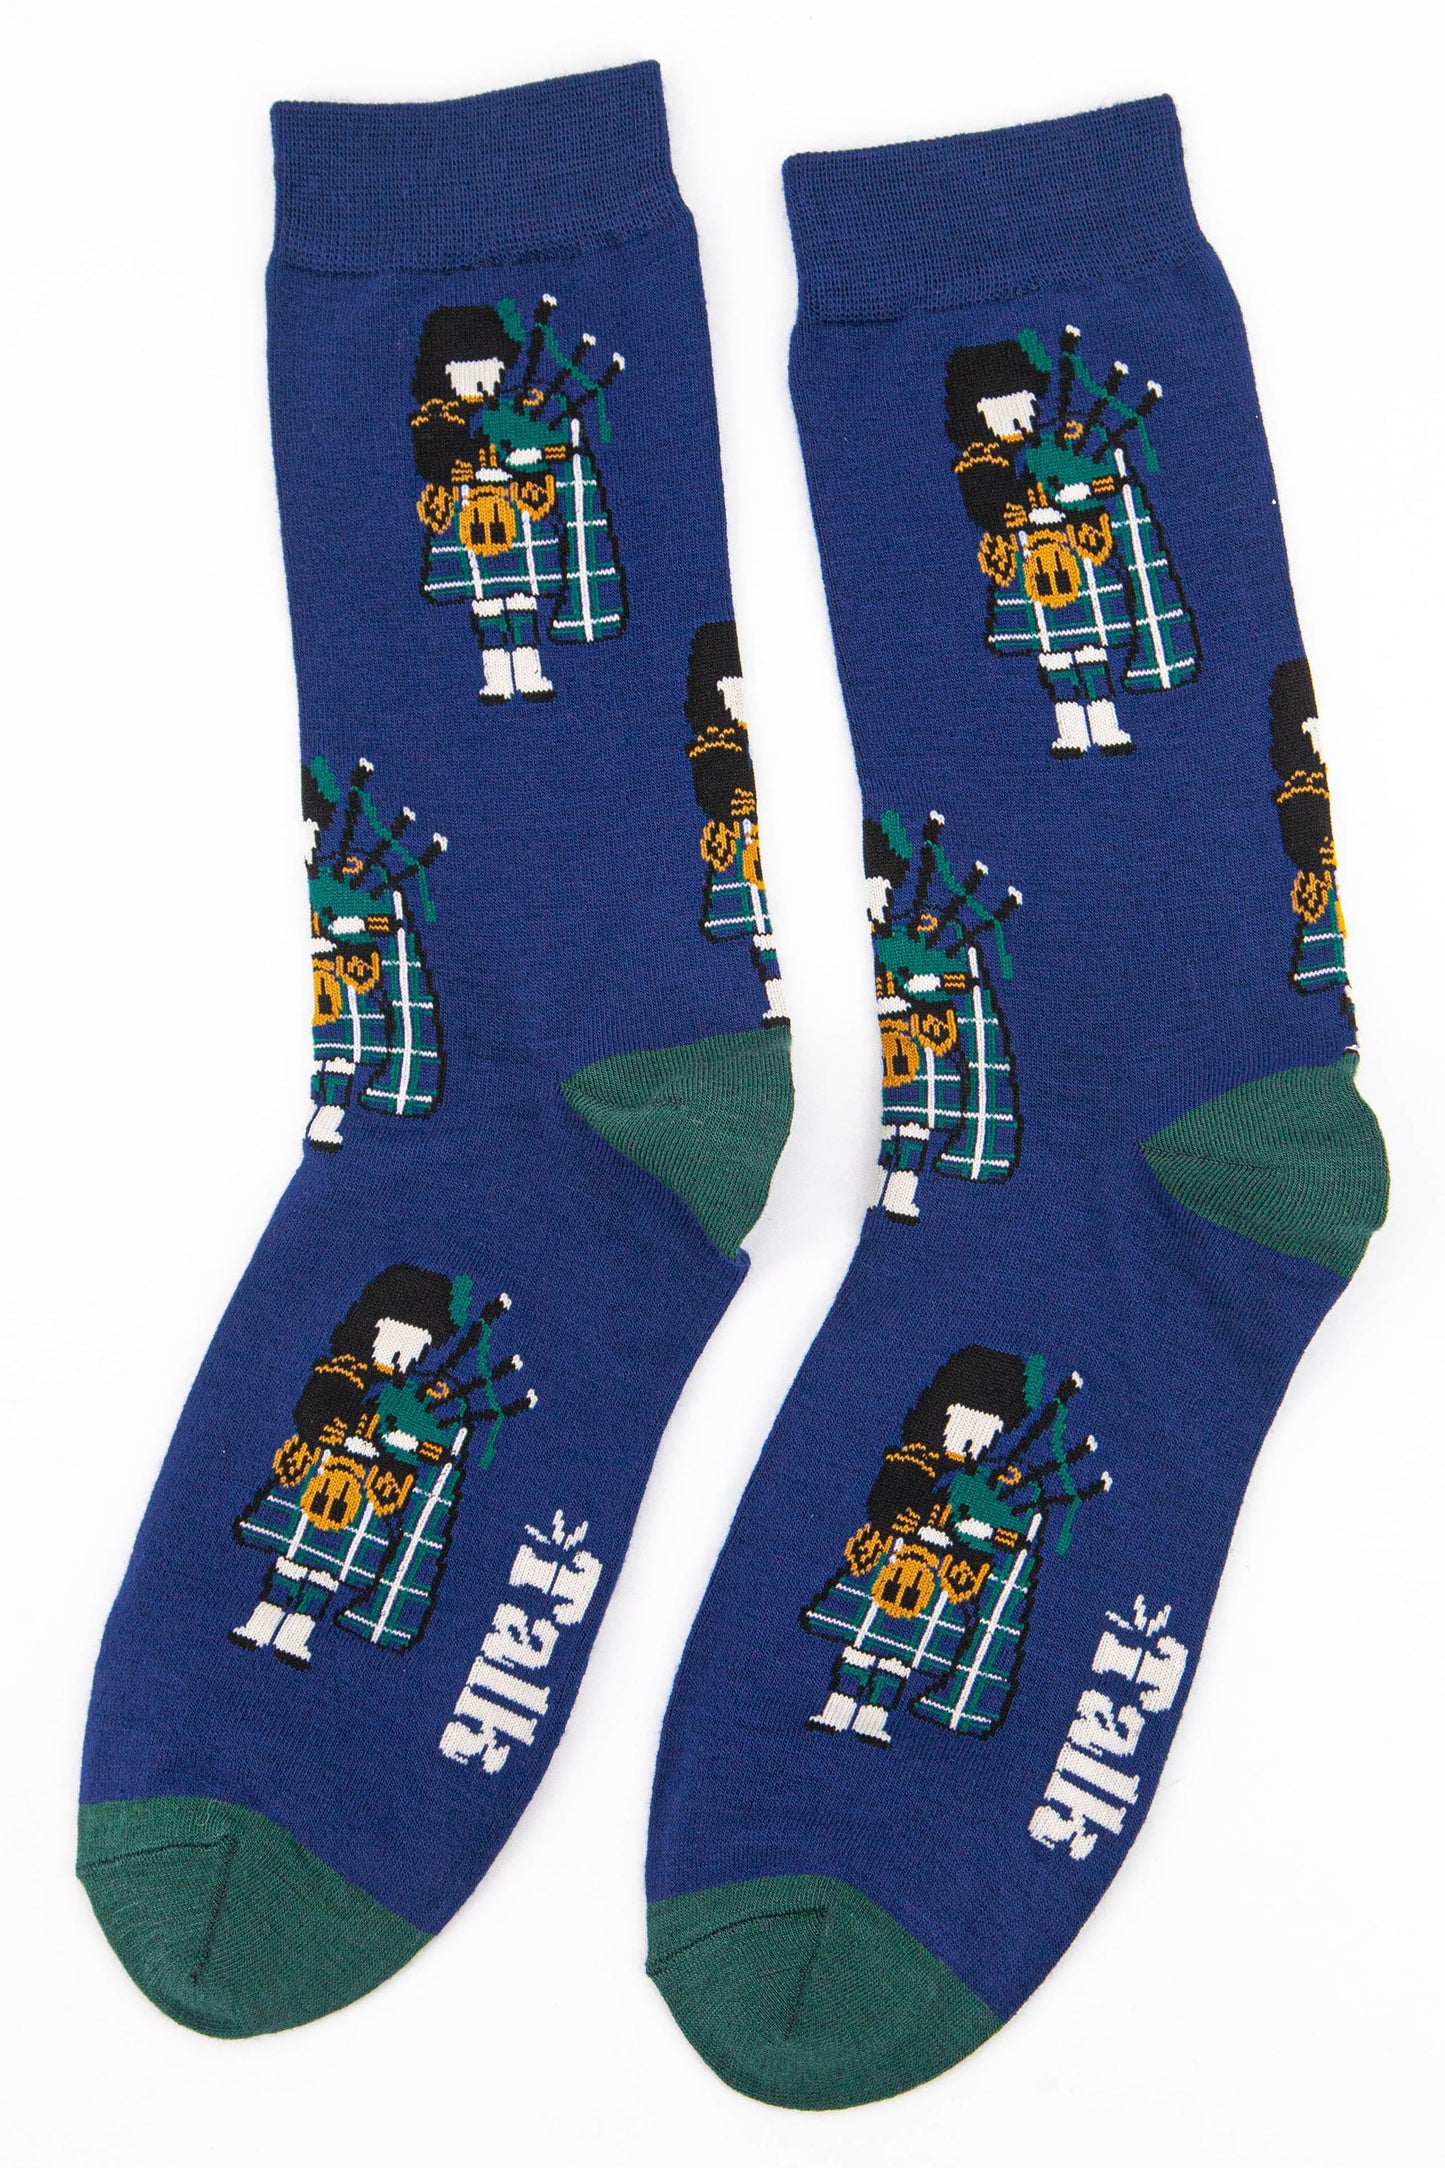 blue dress socks with green toe, and heel featuring a highland piper playing the Scottish bagpipes